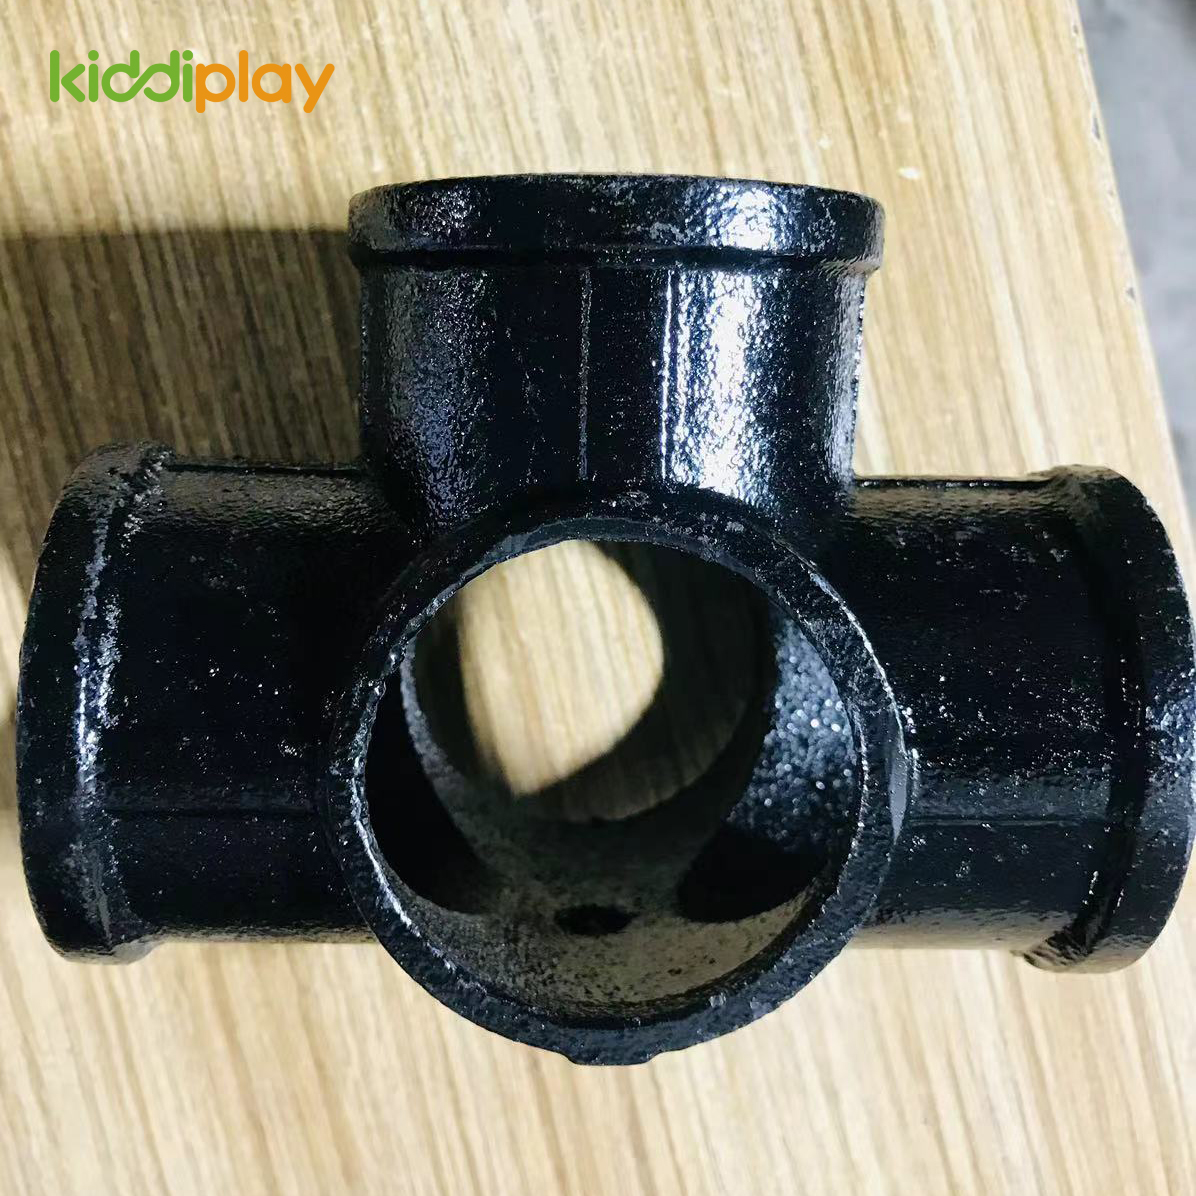 Cast Iron Steel Pipe Connector for Indoor Playground Structure